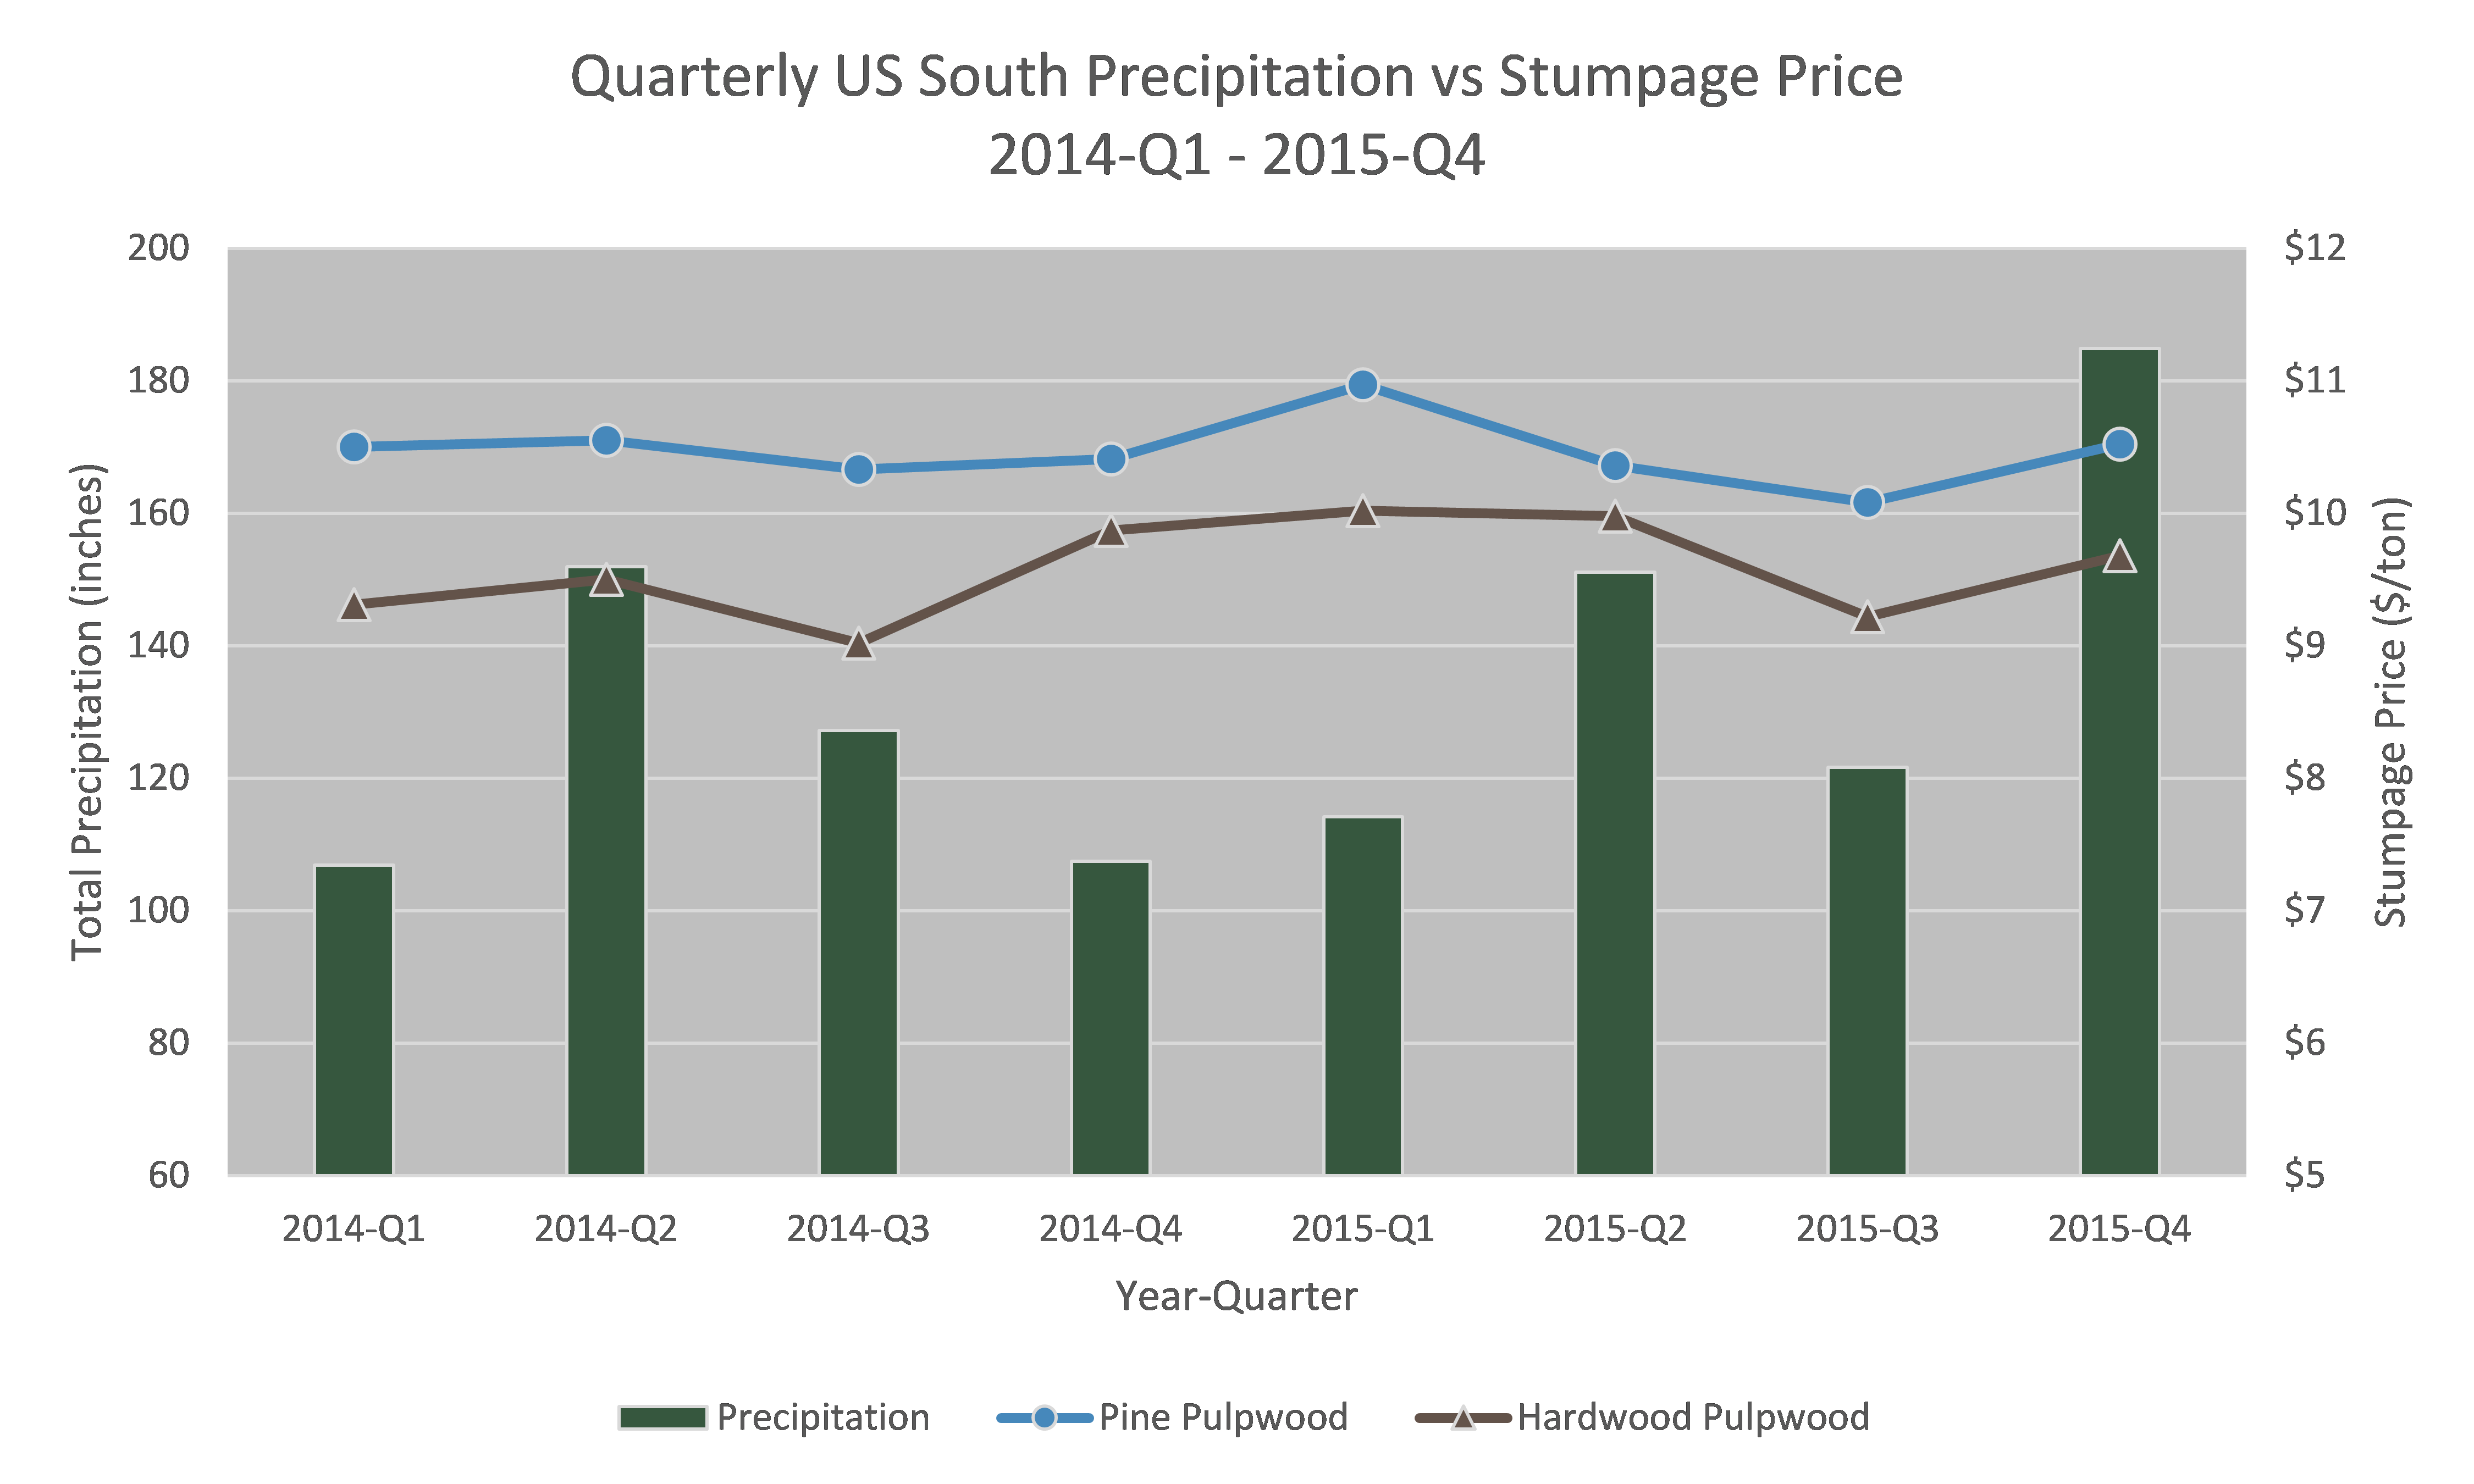 Record Precipitation in 4Q2015 has Little Effect on US South Stumpage Prices